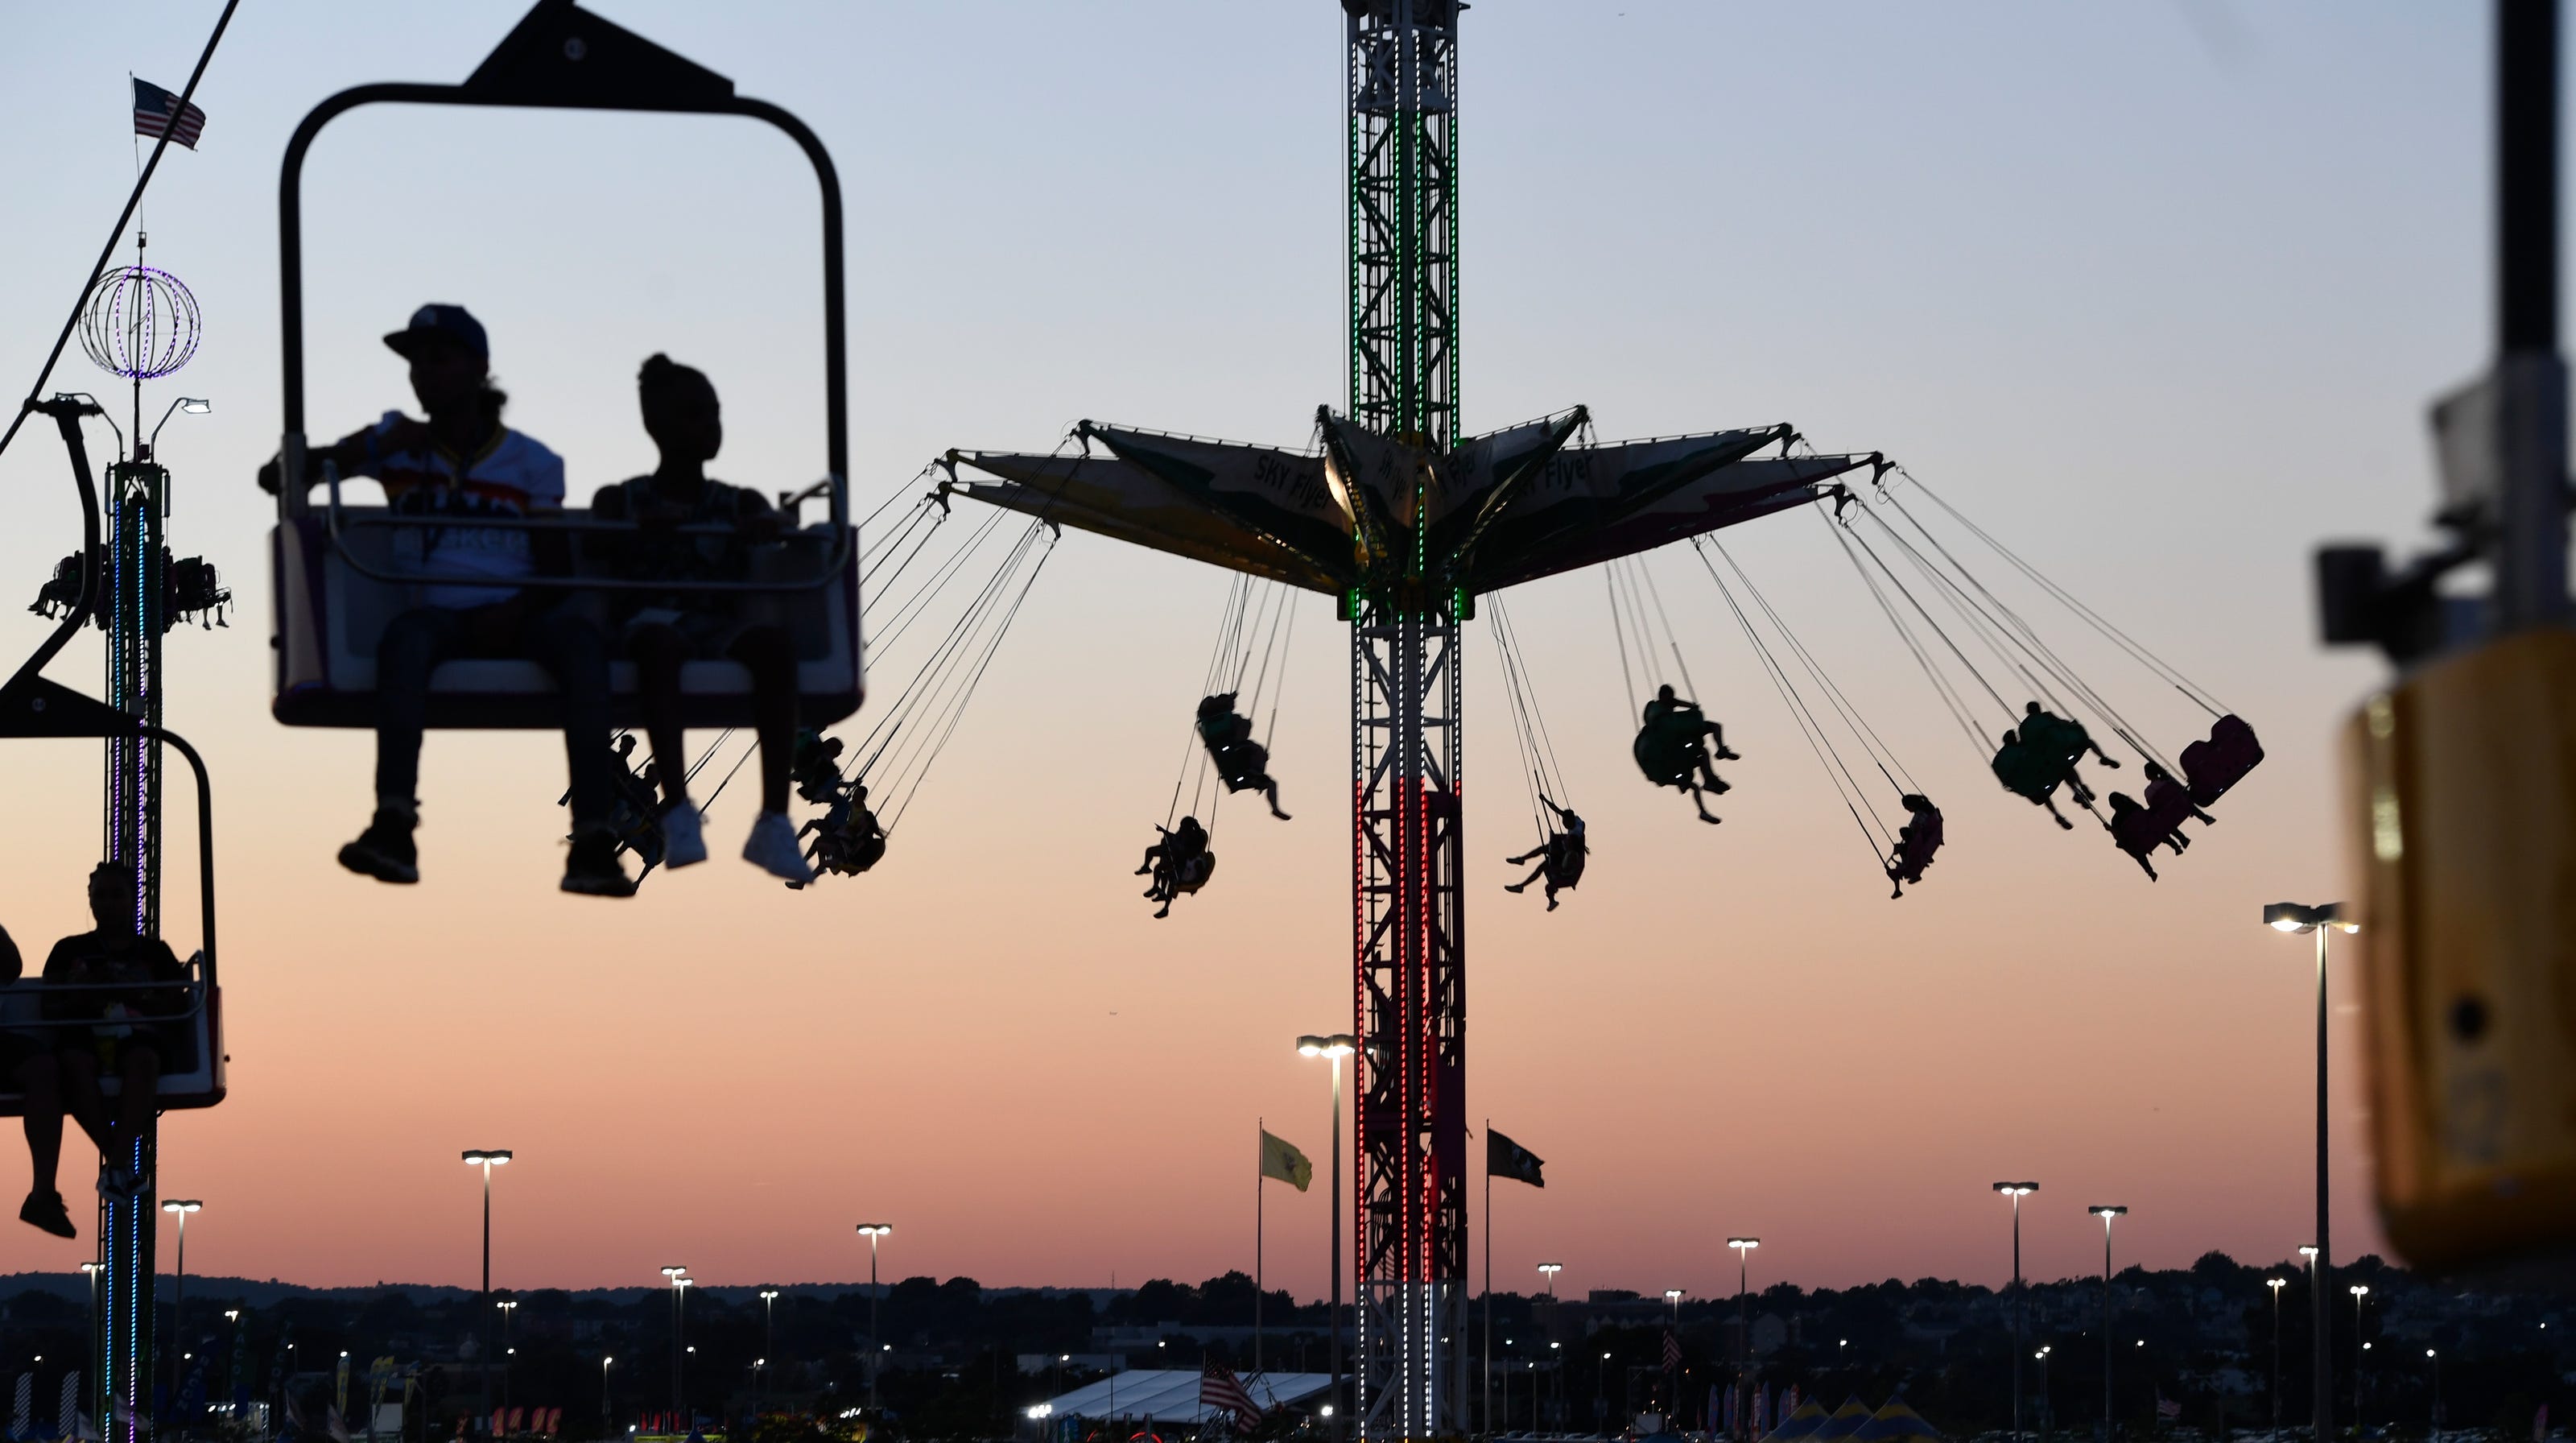 NJ State Fair Meadowlands at MetLife Stadium canceled for 2020